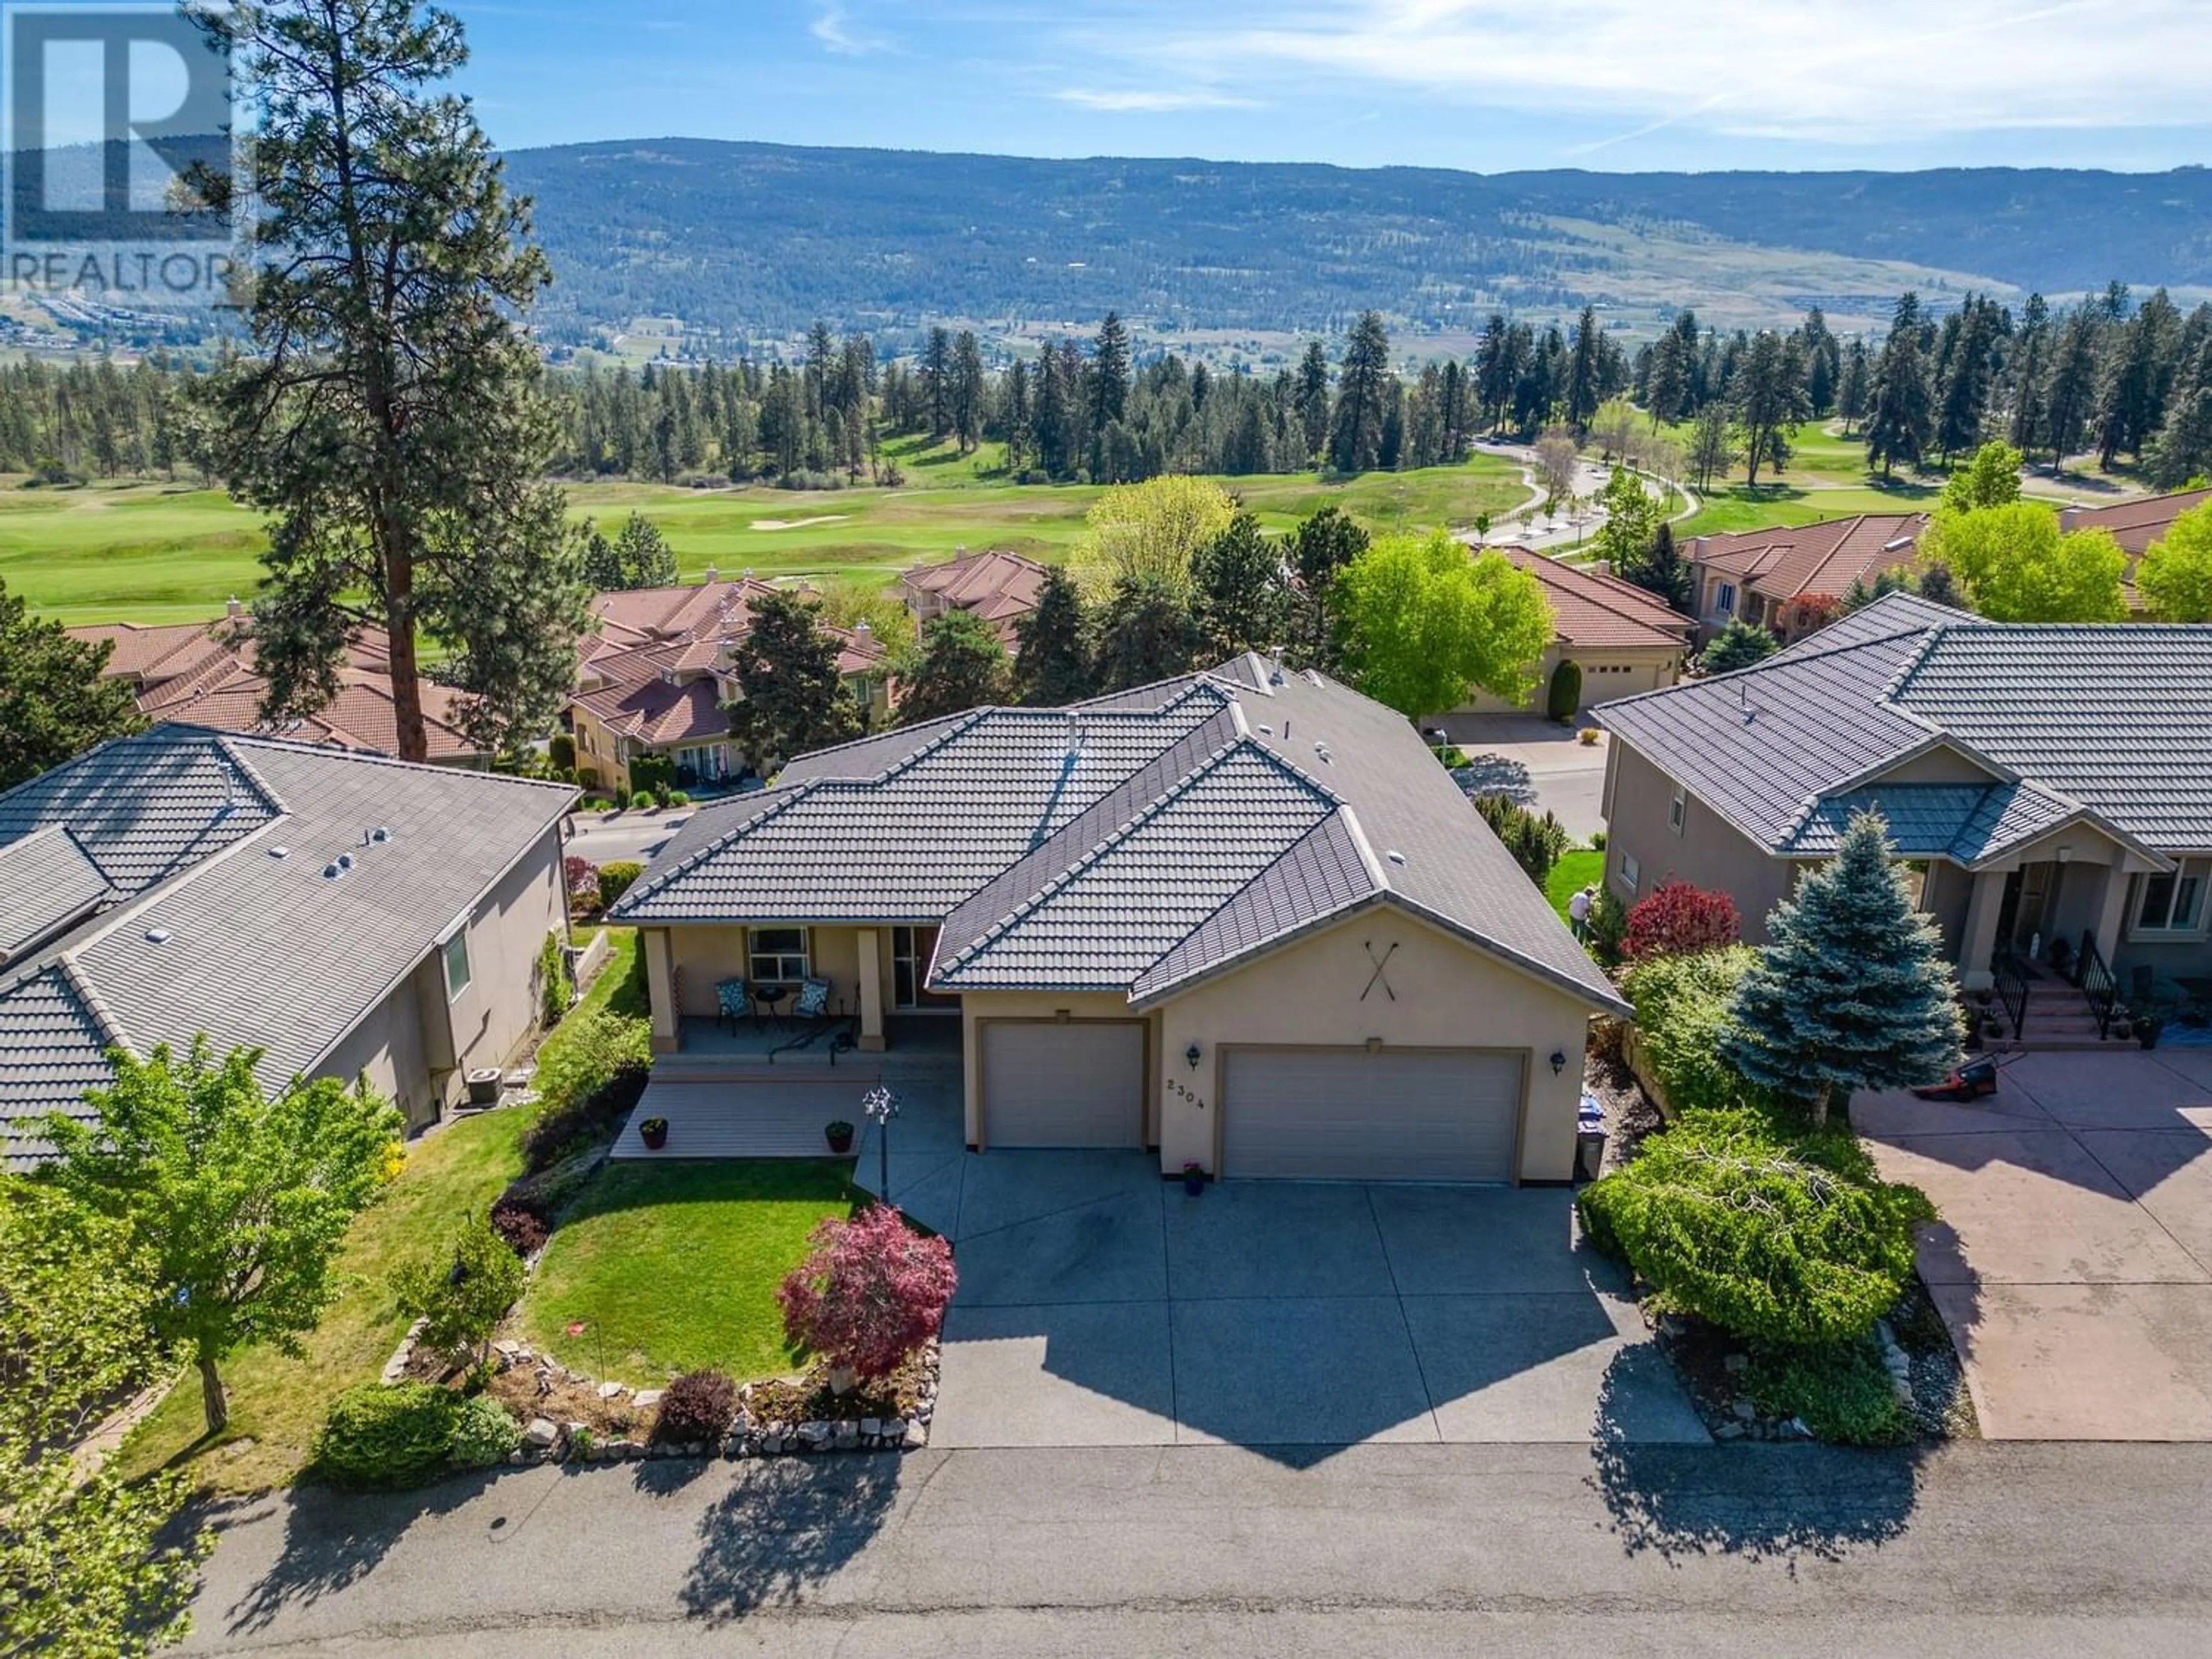 Frontside or backside of a home for 2304 Capistrano Drive, Kelowna British Columbia V1V2A2